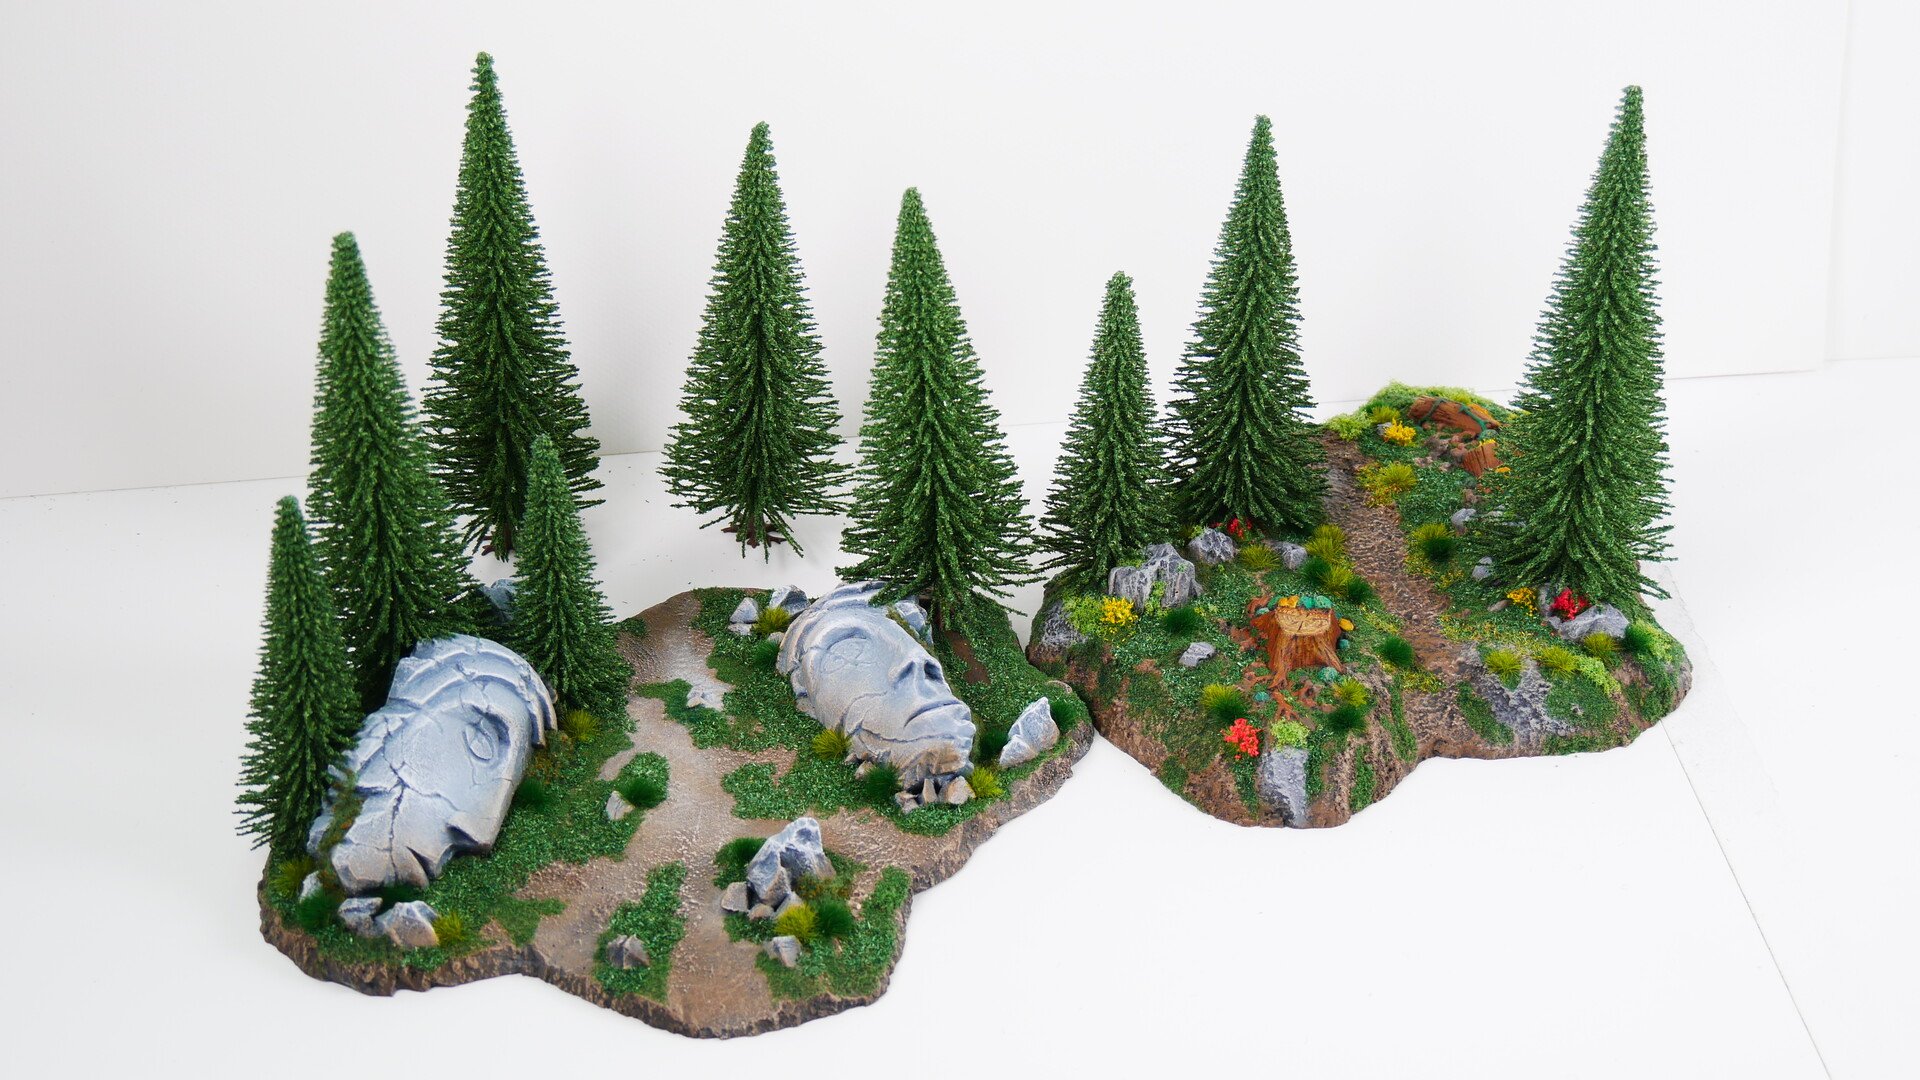 A lot of terrain for your money